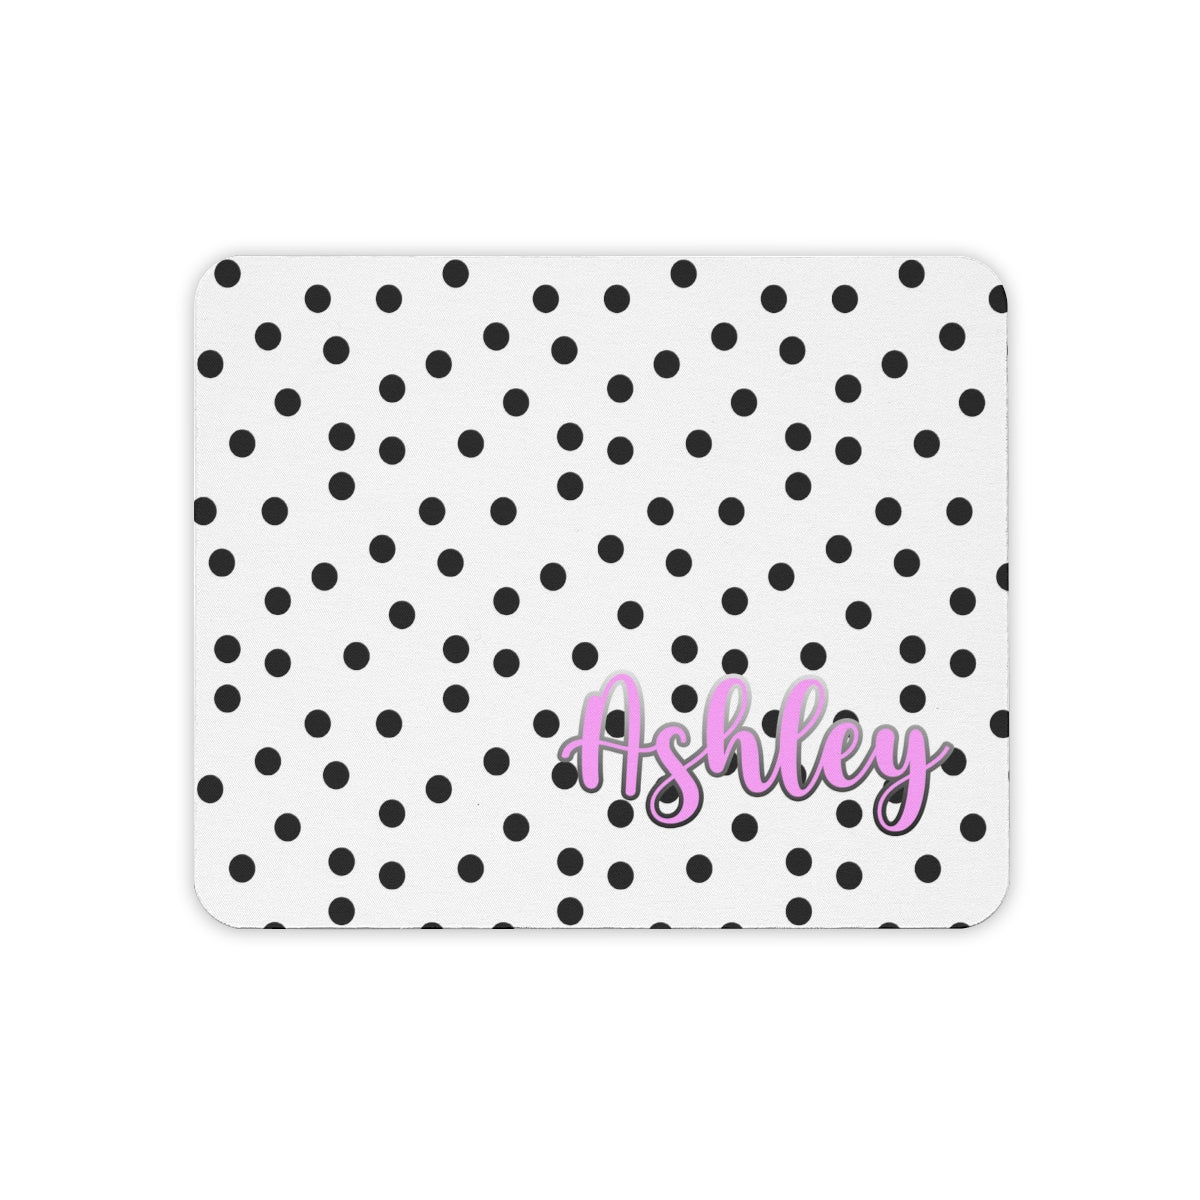 Personalized Black and White Polka Dot Mouse Pad with Pink Name